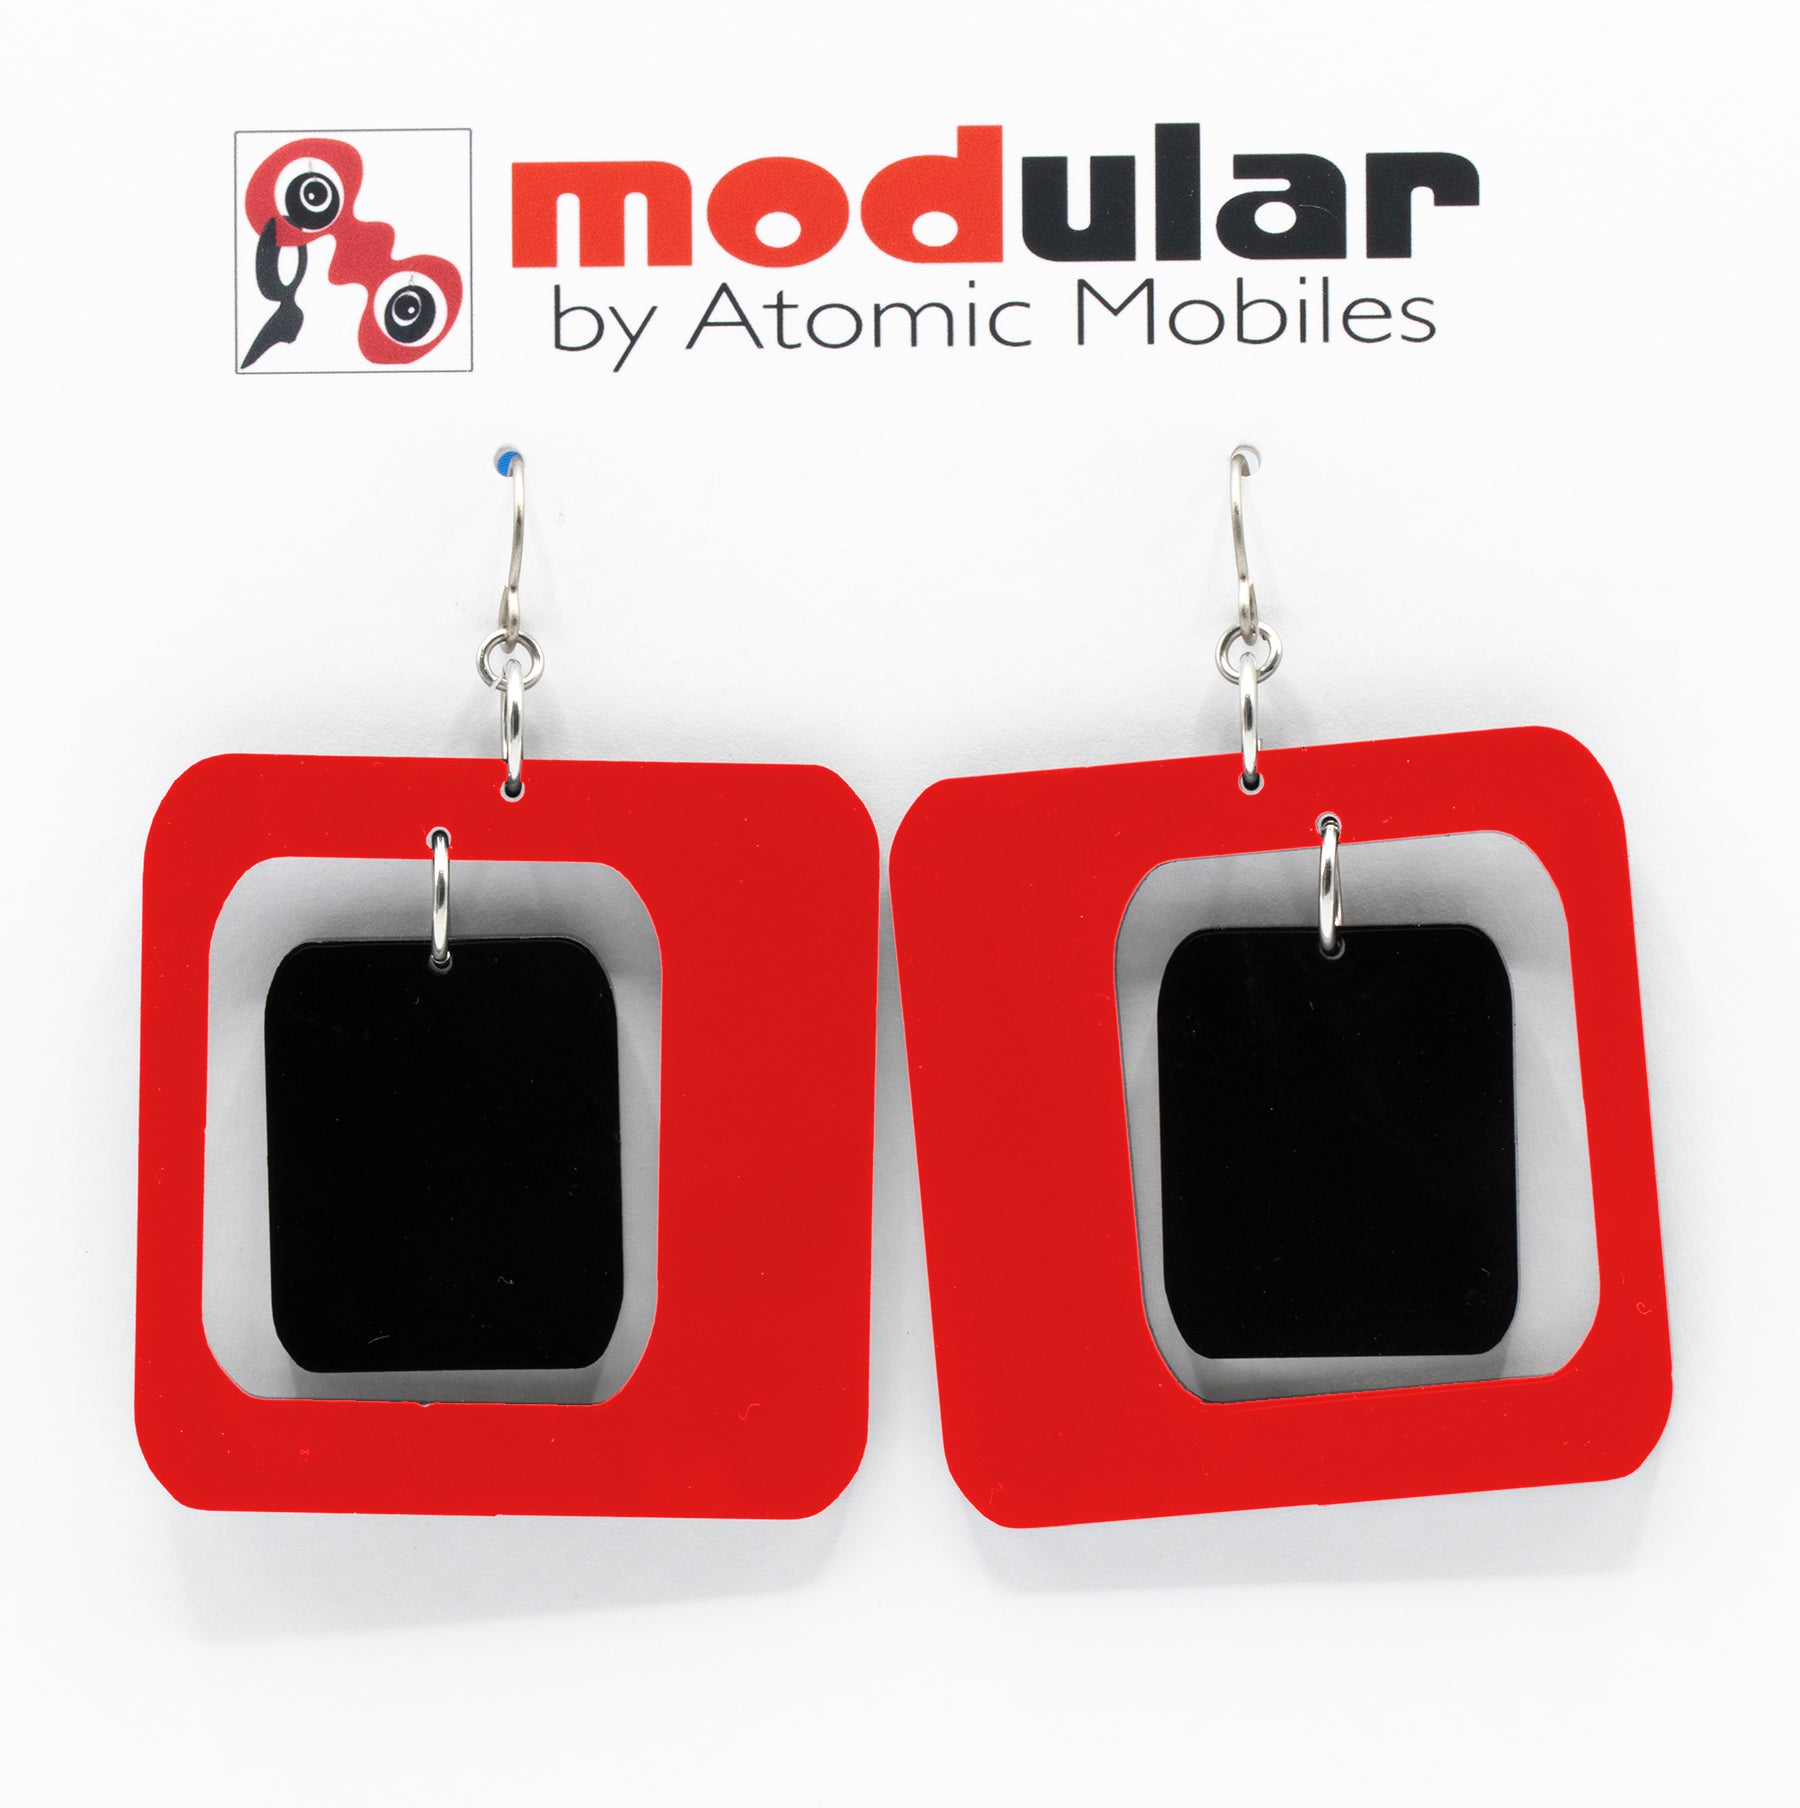 MODular Earrings - Coolsville Statement Earrings in Red and Black by AtomicMobiles.com - retro era inspired mod handmade jewelry